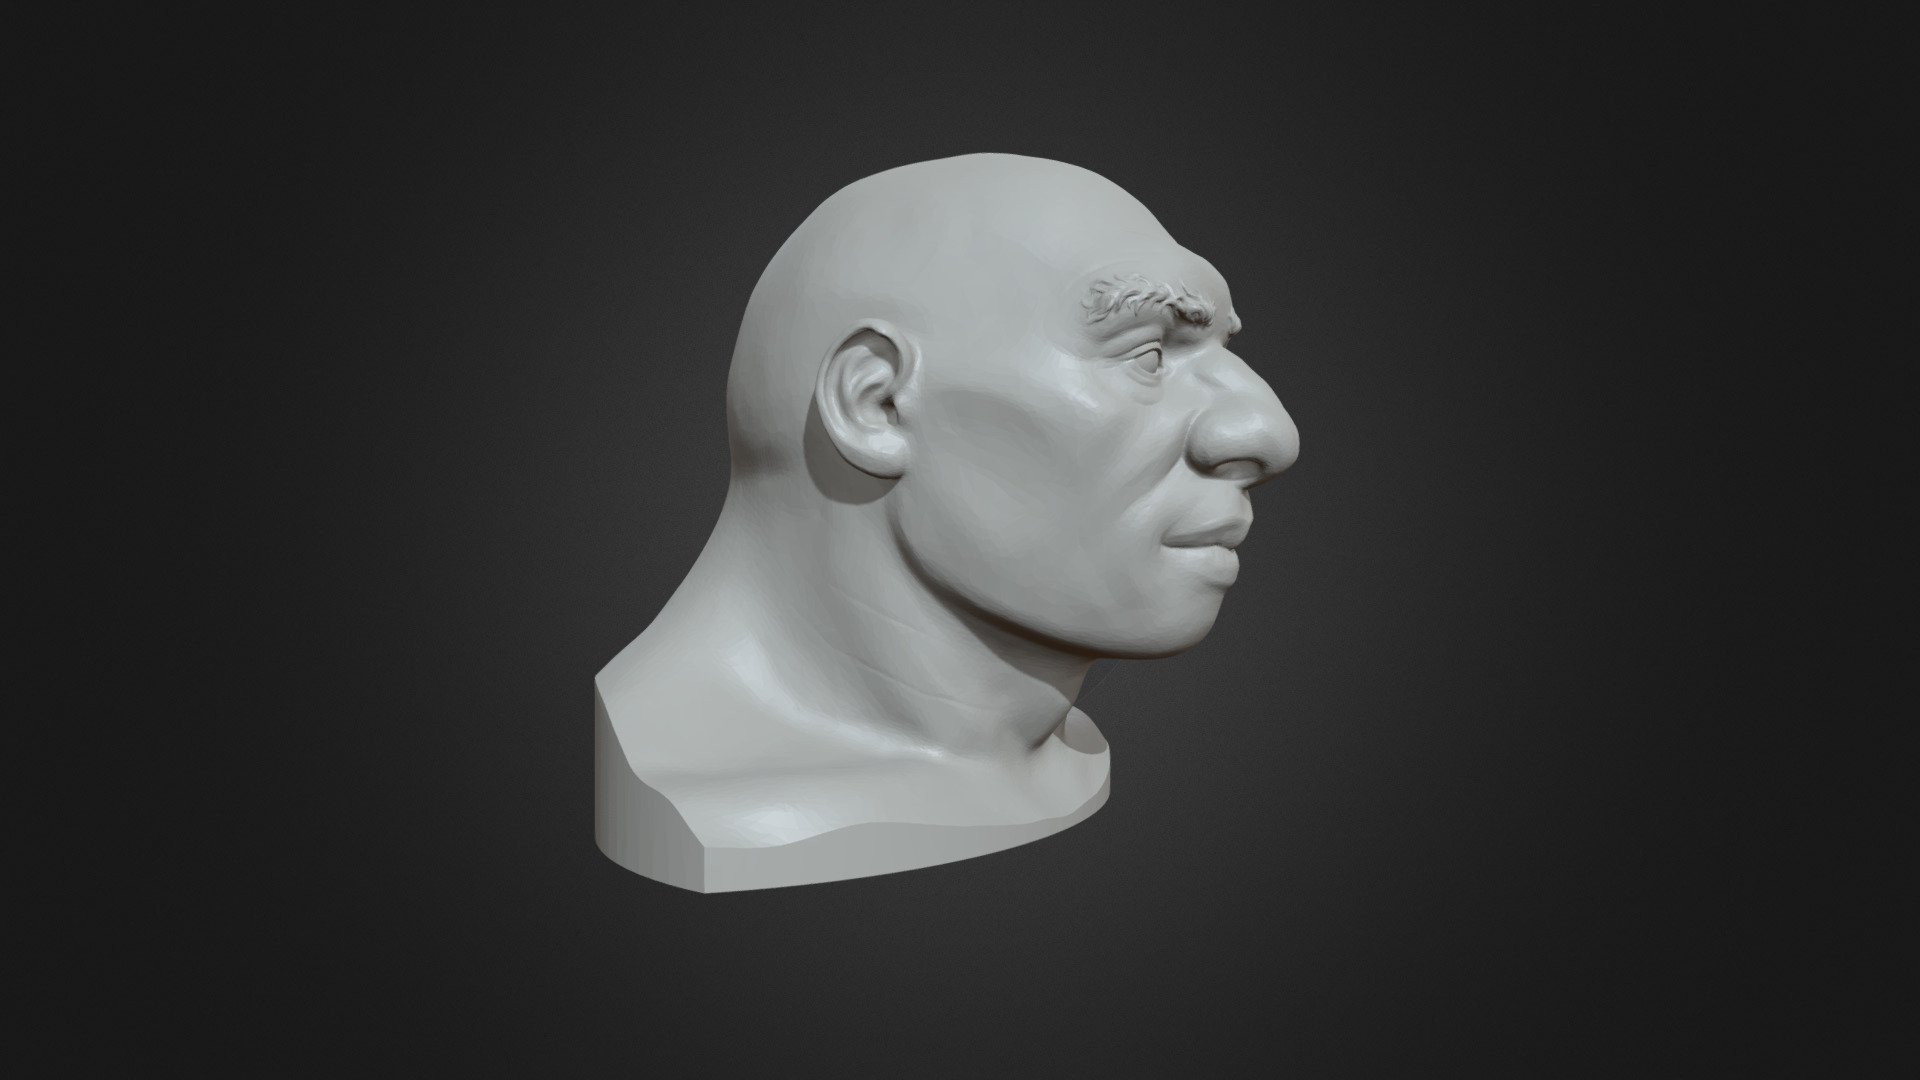 High Poly man Head.

Measure units are meters, it has about 38 cm in height.
Mesh is manifold with no bad contiguous edges.

==============================

Files available in two versions: 

1)Man_Head-01 contains 795747 faces

2)Man_Head-02 contains 52948 faces (this version you can see in 3d viewer)

===================================

Available formats: .blend, fbx, .obj, .stl, .3ds, .dae 3d model